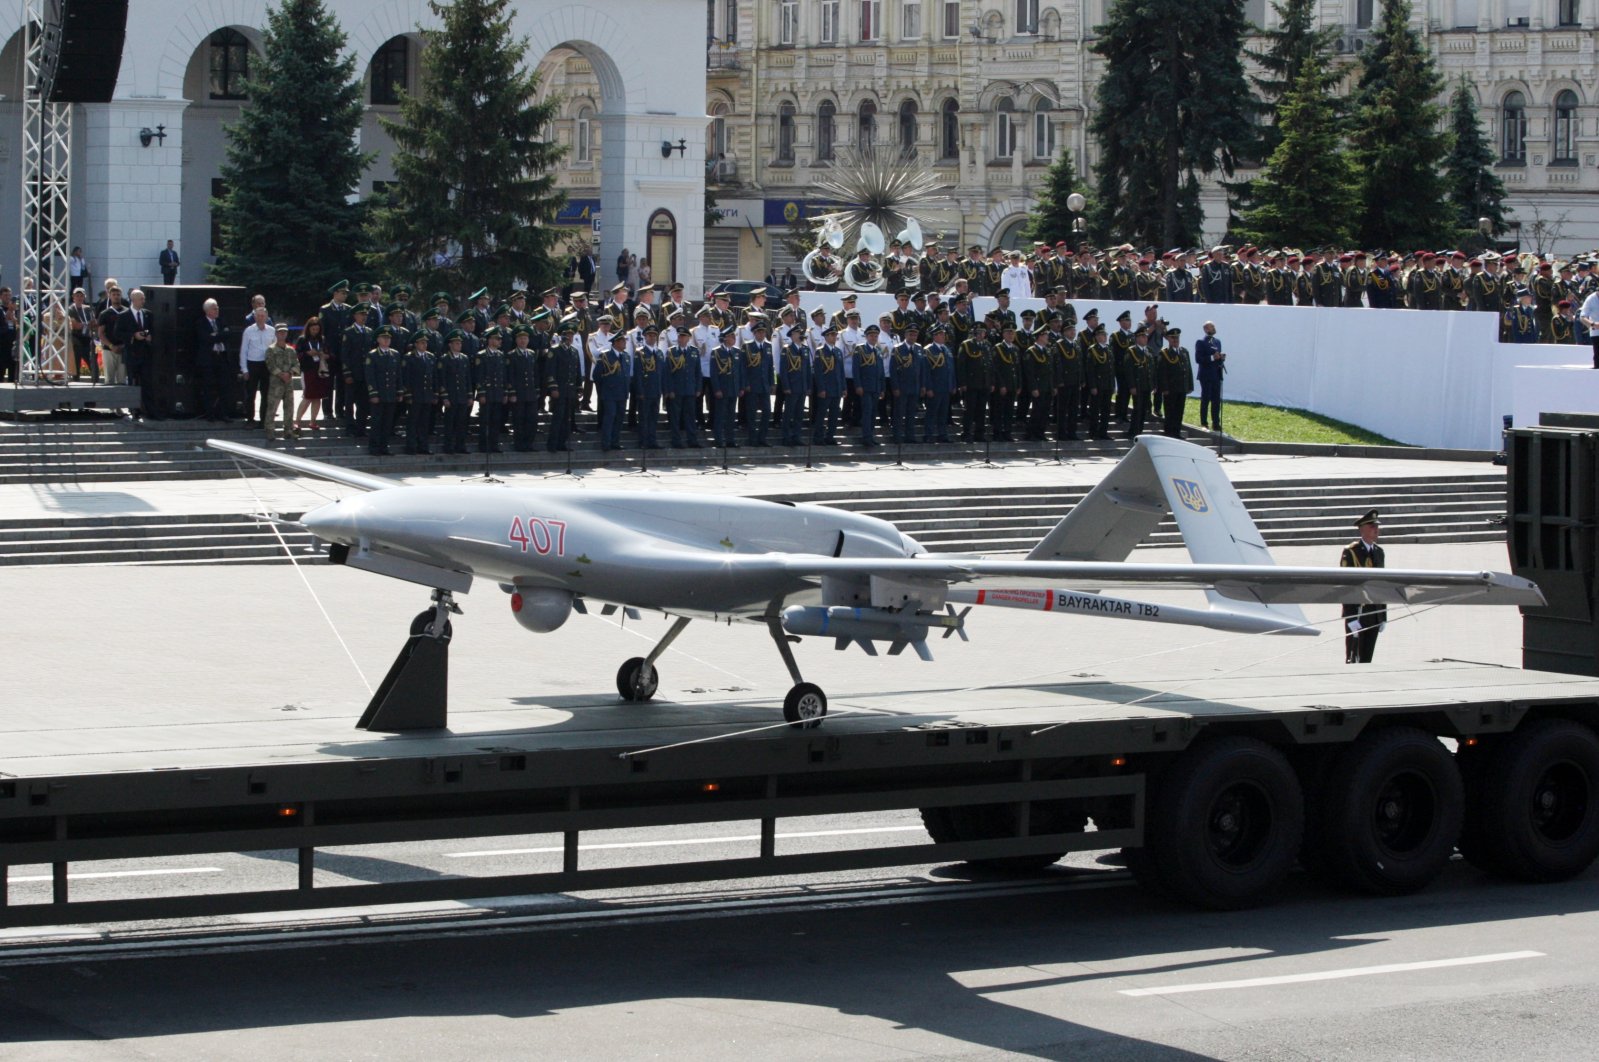 A Bayraktar drone of the Ukrainian air force is presented in a military parade in Kyiv, Ukraine, Aug. 25, 2021. (AA Photo)